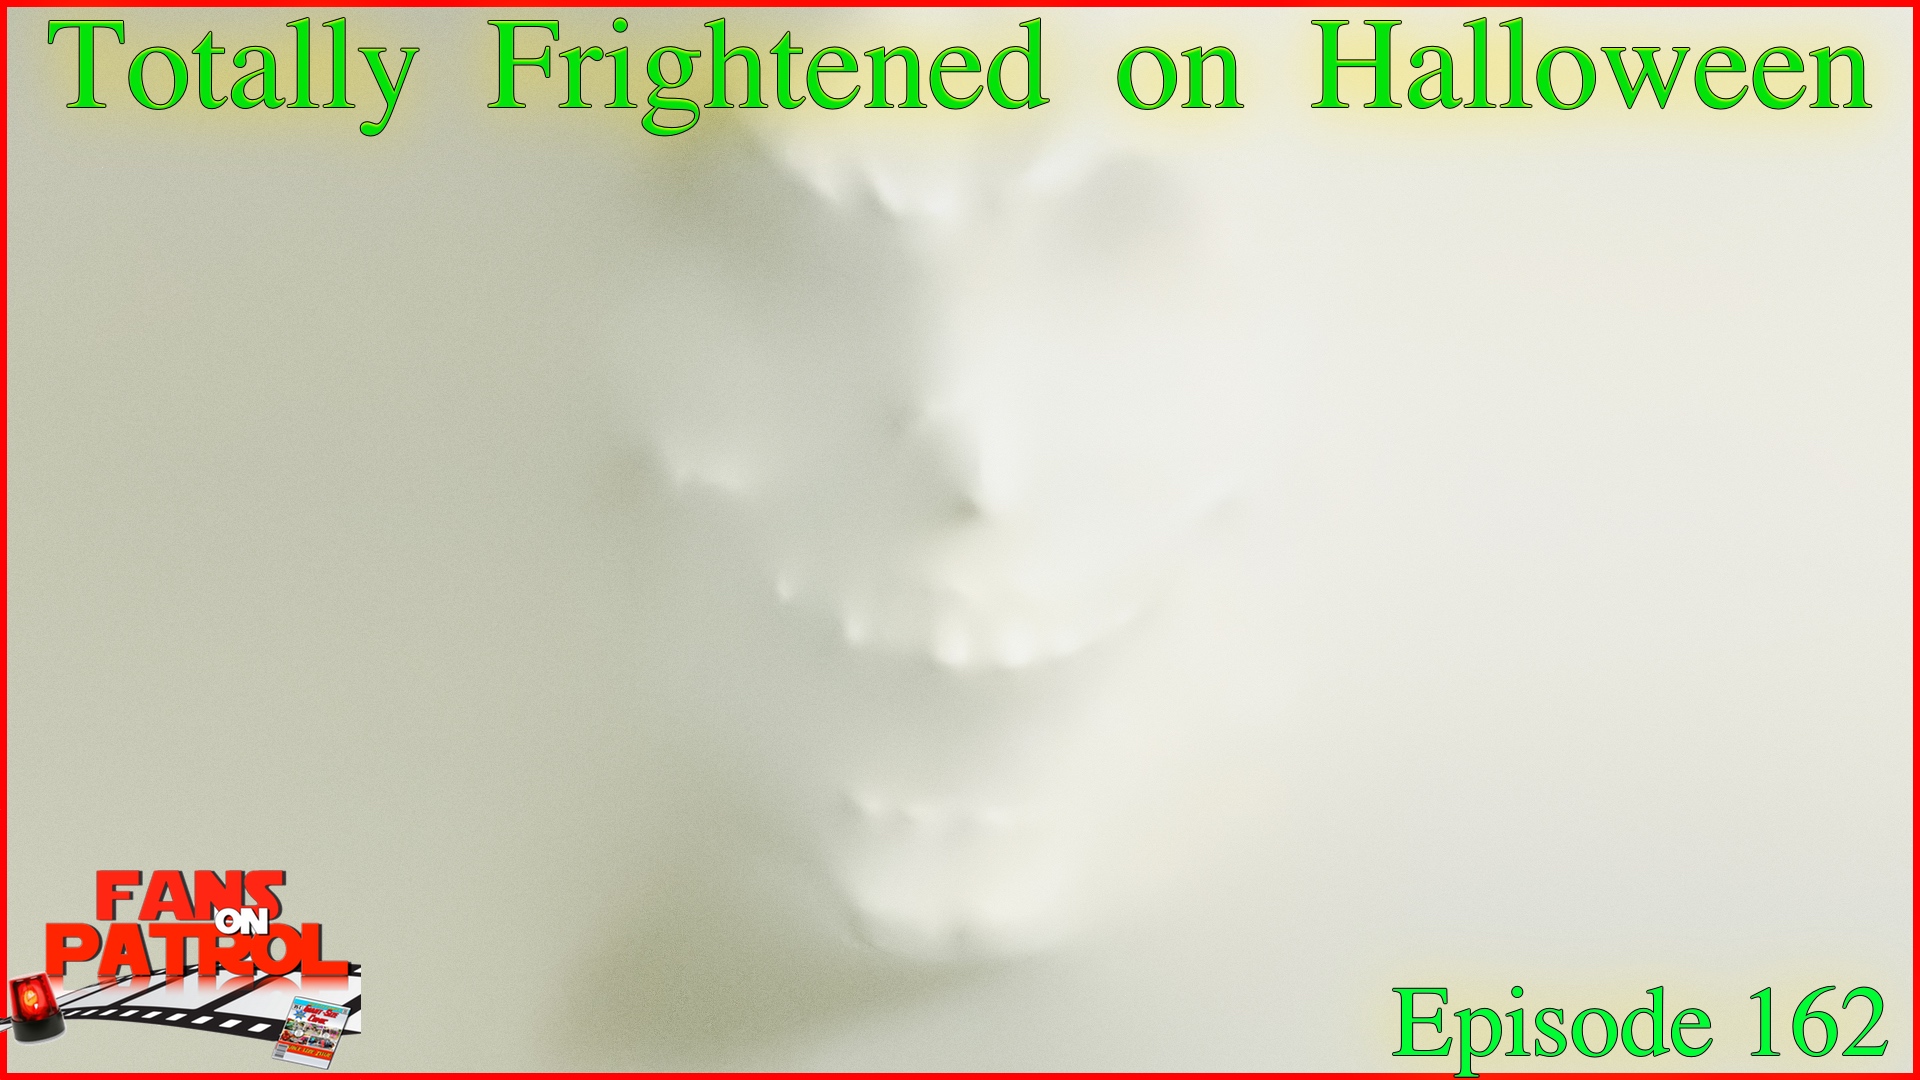 Totally Frightened on Halloween Episode 162